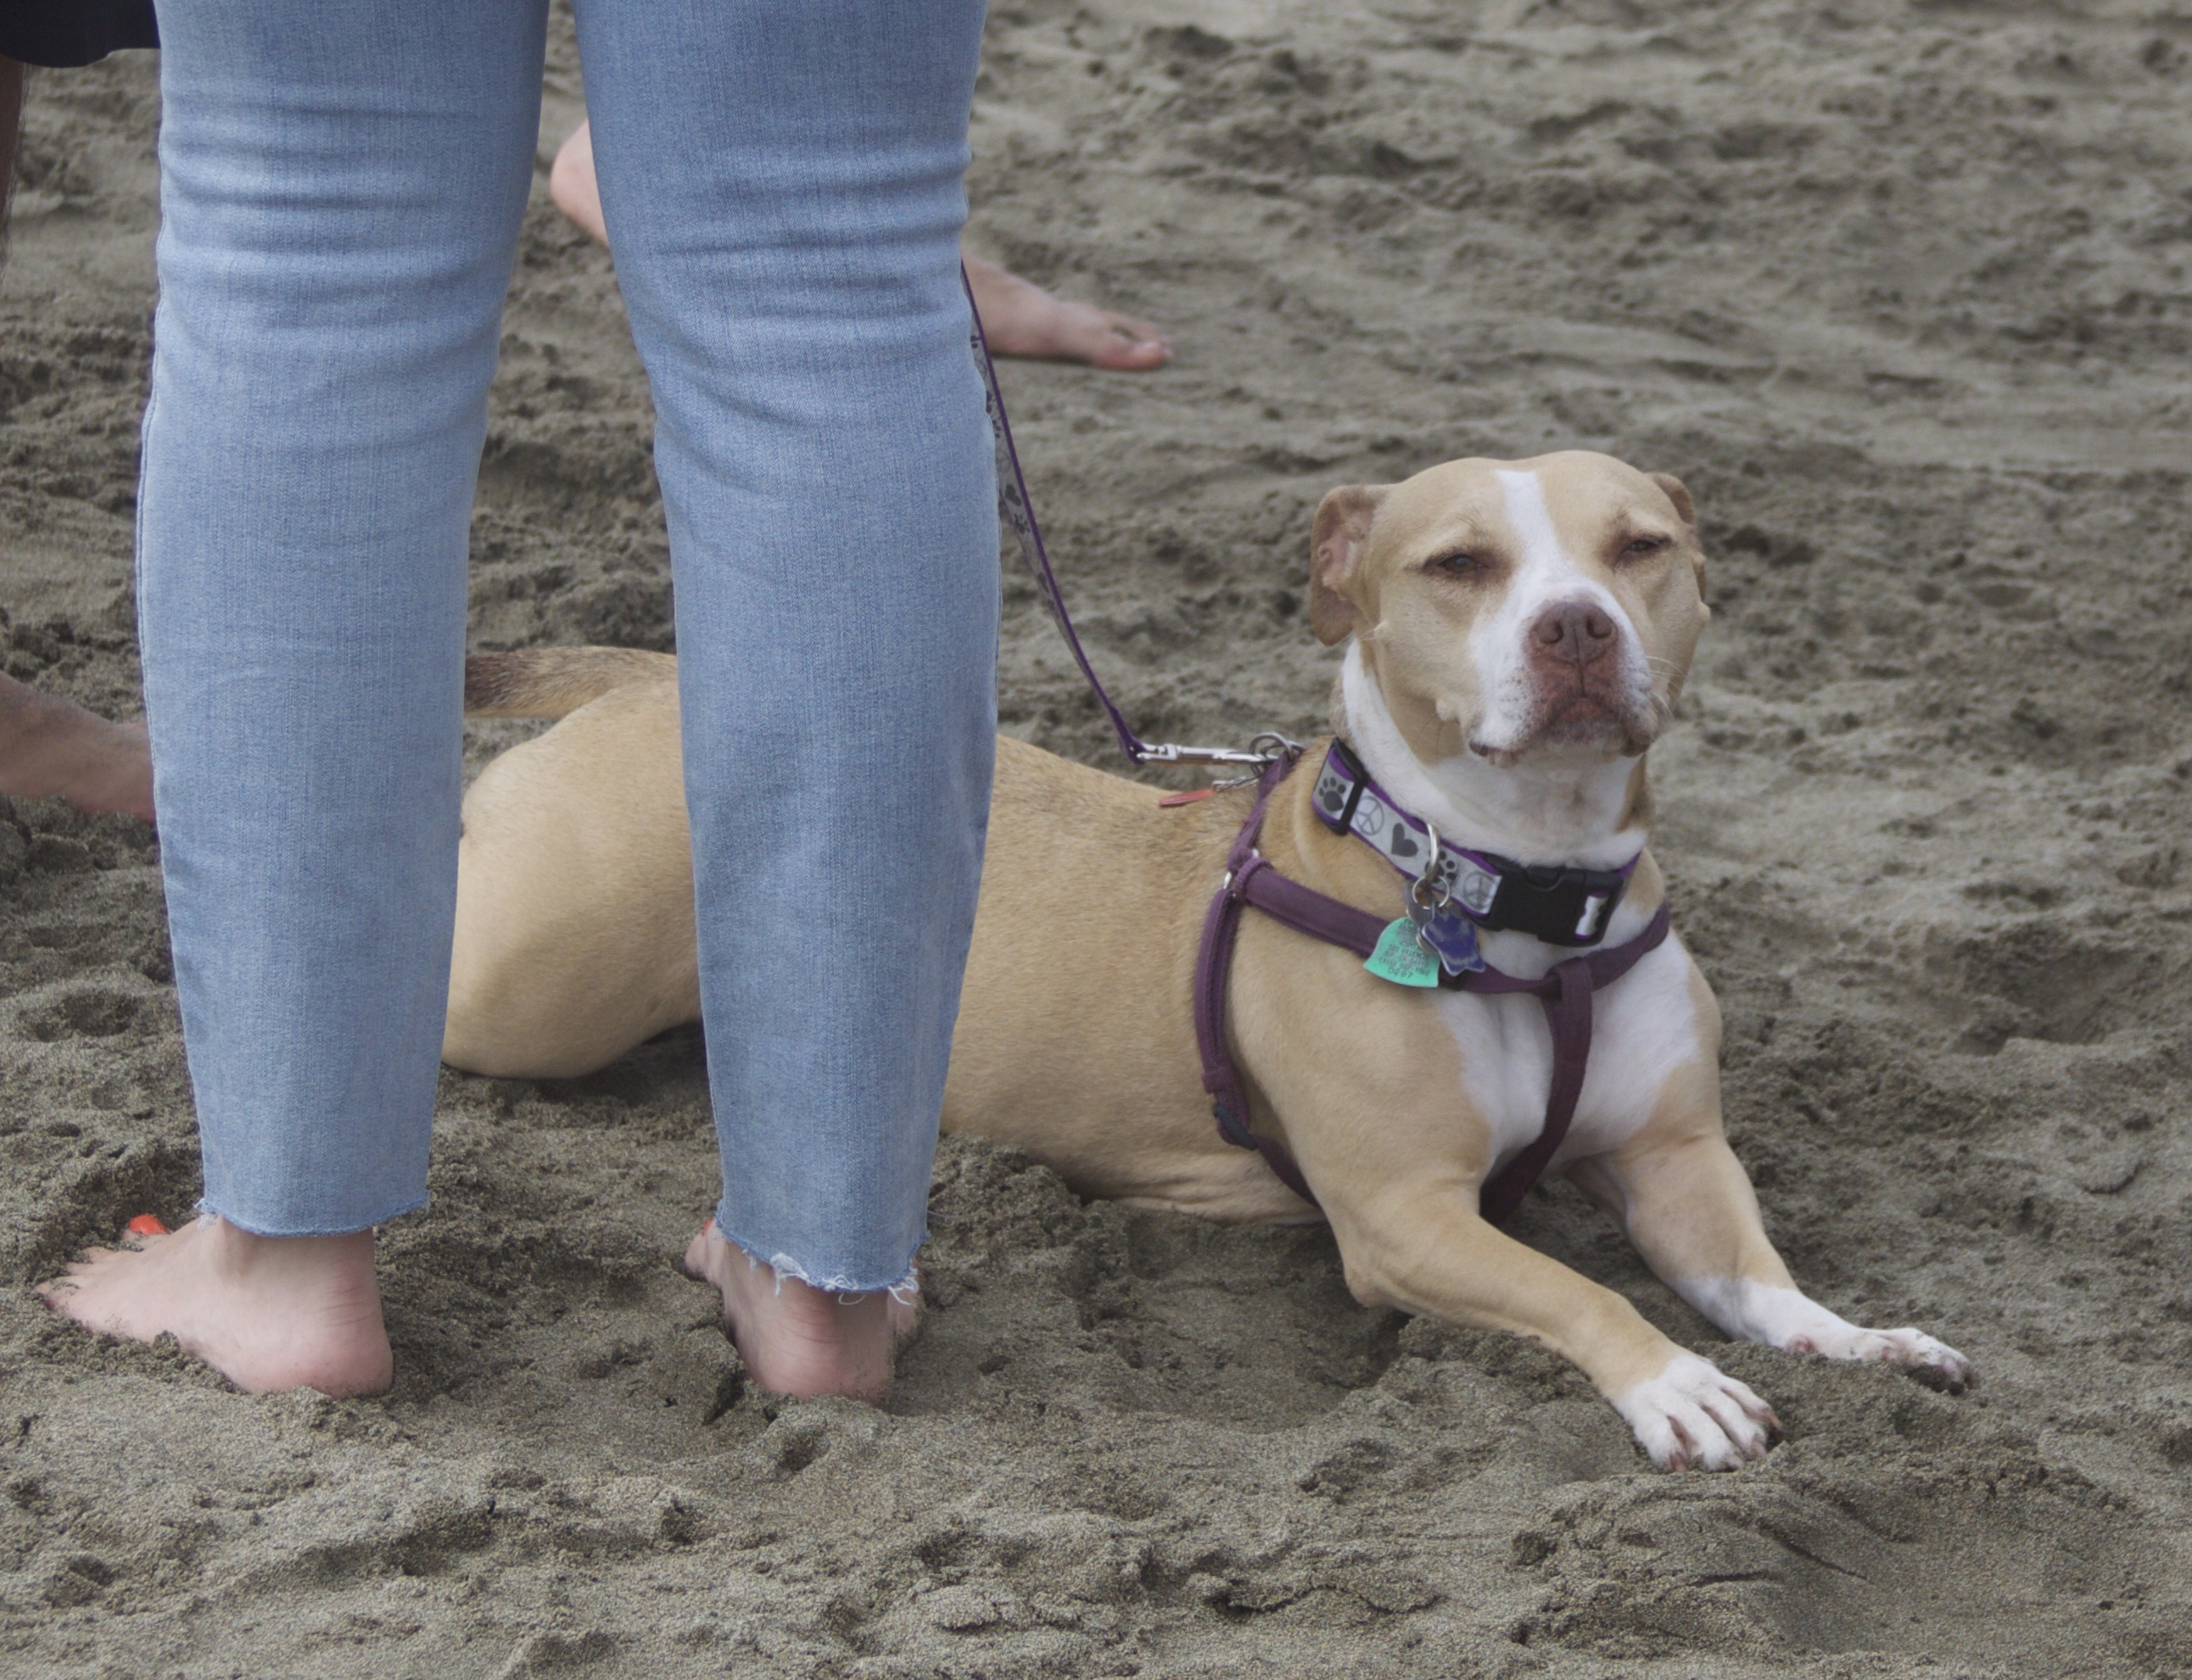 American Pit Bull Terrier Mix Sprawled Out On A Sandy Beach